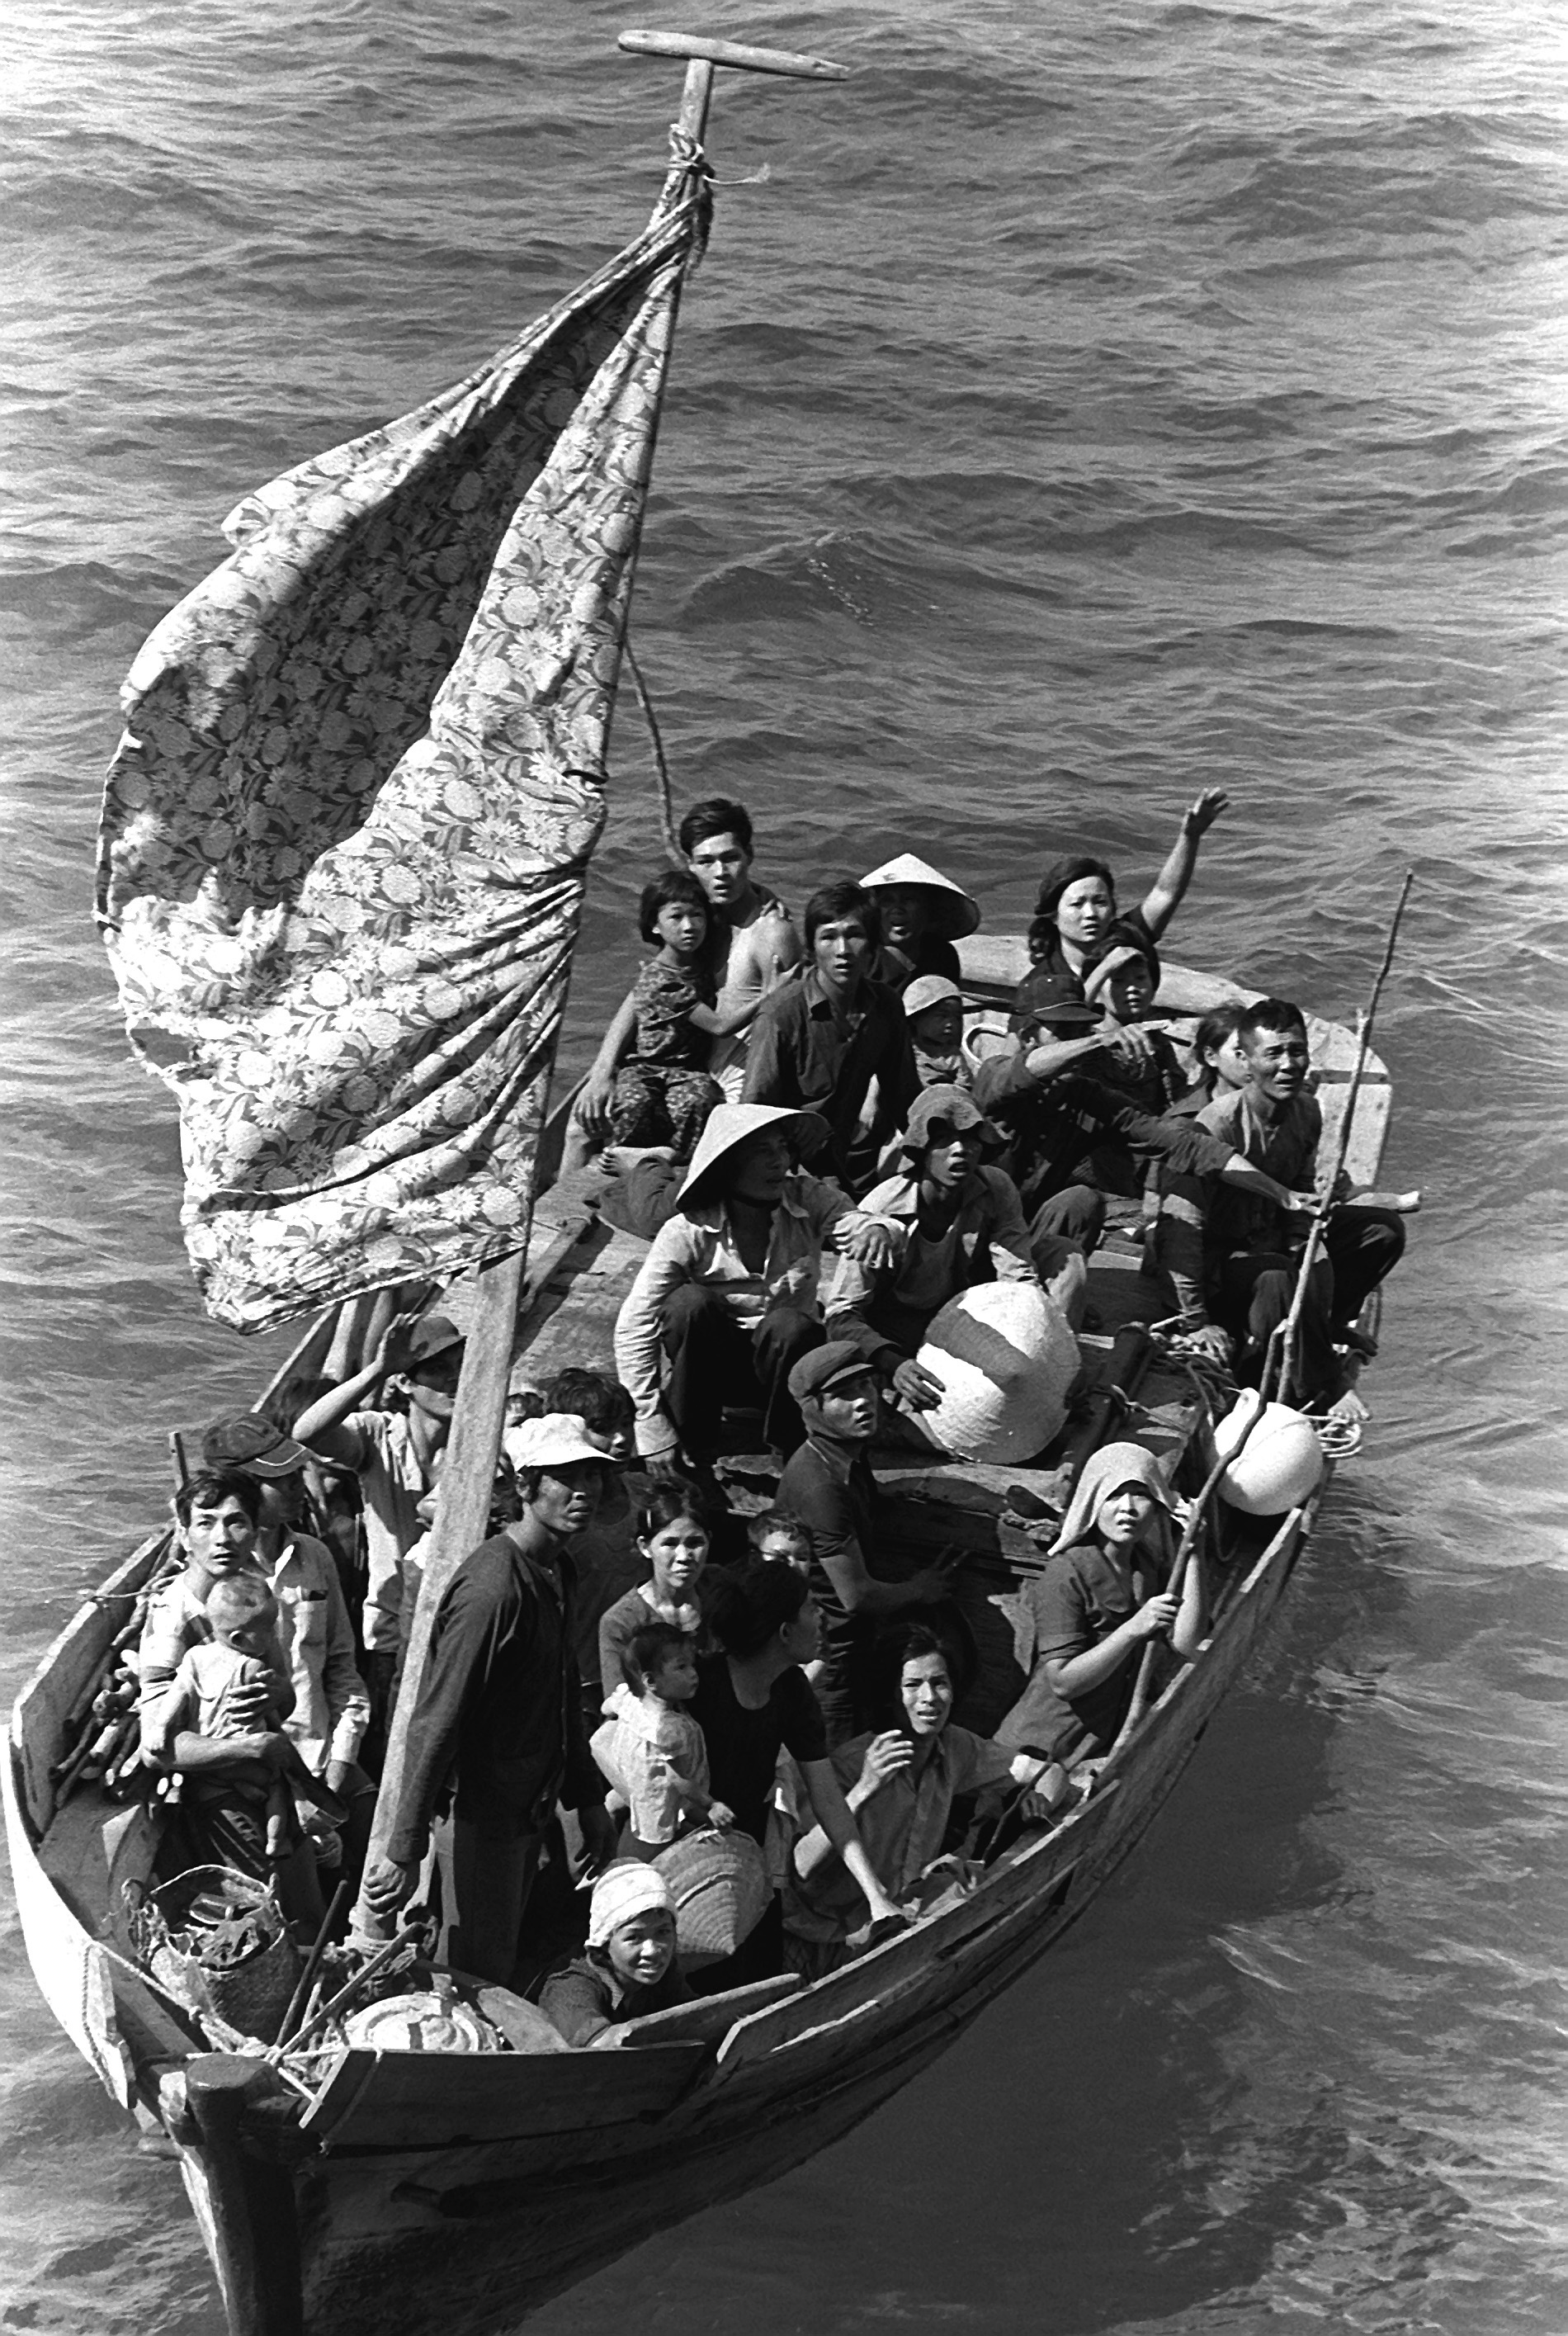 35 Vietnamese refugees wait to be taken aboard the amphibious command ship USS BLUE RIDGE (LCC-19). They are being rescued from a 35 foot fishing boat 350 miles northeast of Cam Ranh Bay, Vietnam, after spending eight days at sea.